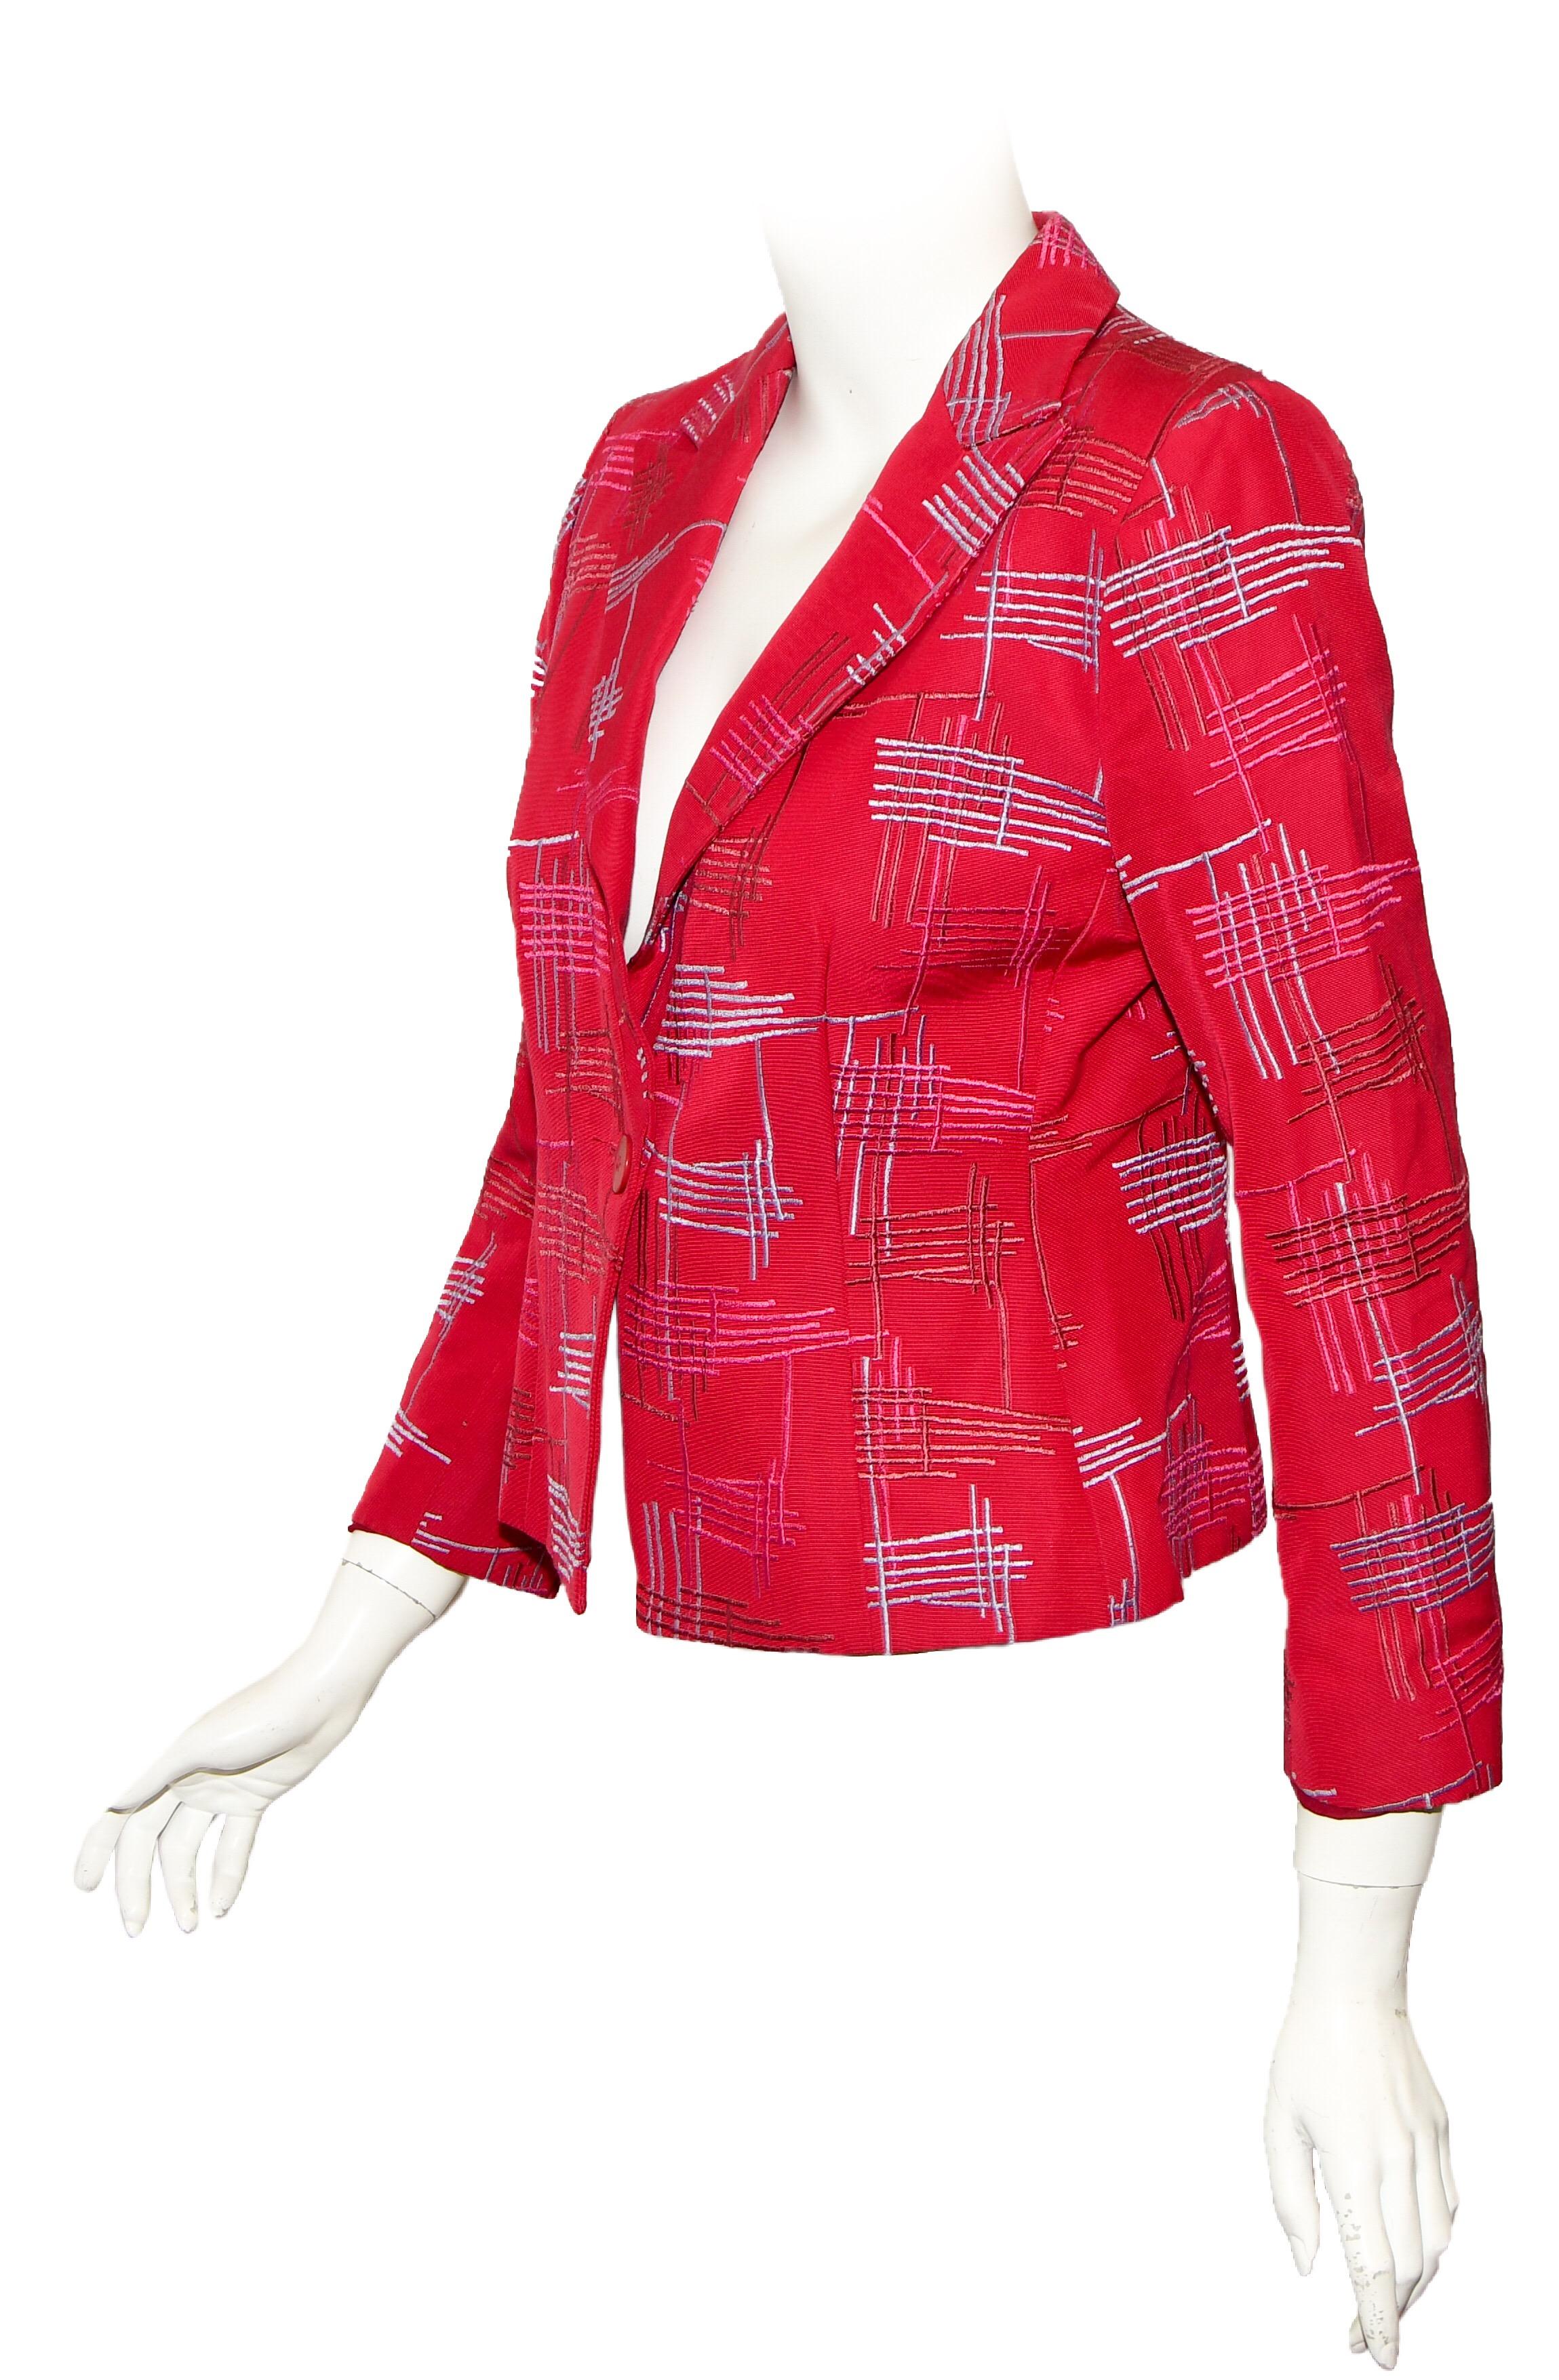 Armani Collezioni red cropped cotton grosgrain embroidered jacket features pink and lavender abstract line design.  Single rear vent and single button closure.  jacket is fully lined in deep pink viscose fabric.  Excellent Condition.  Made in Italy.